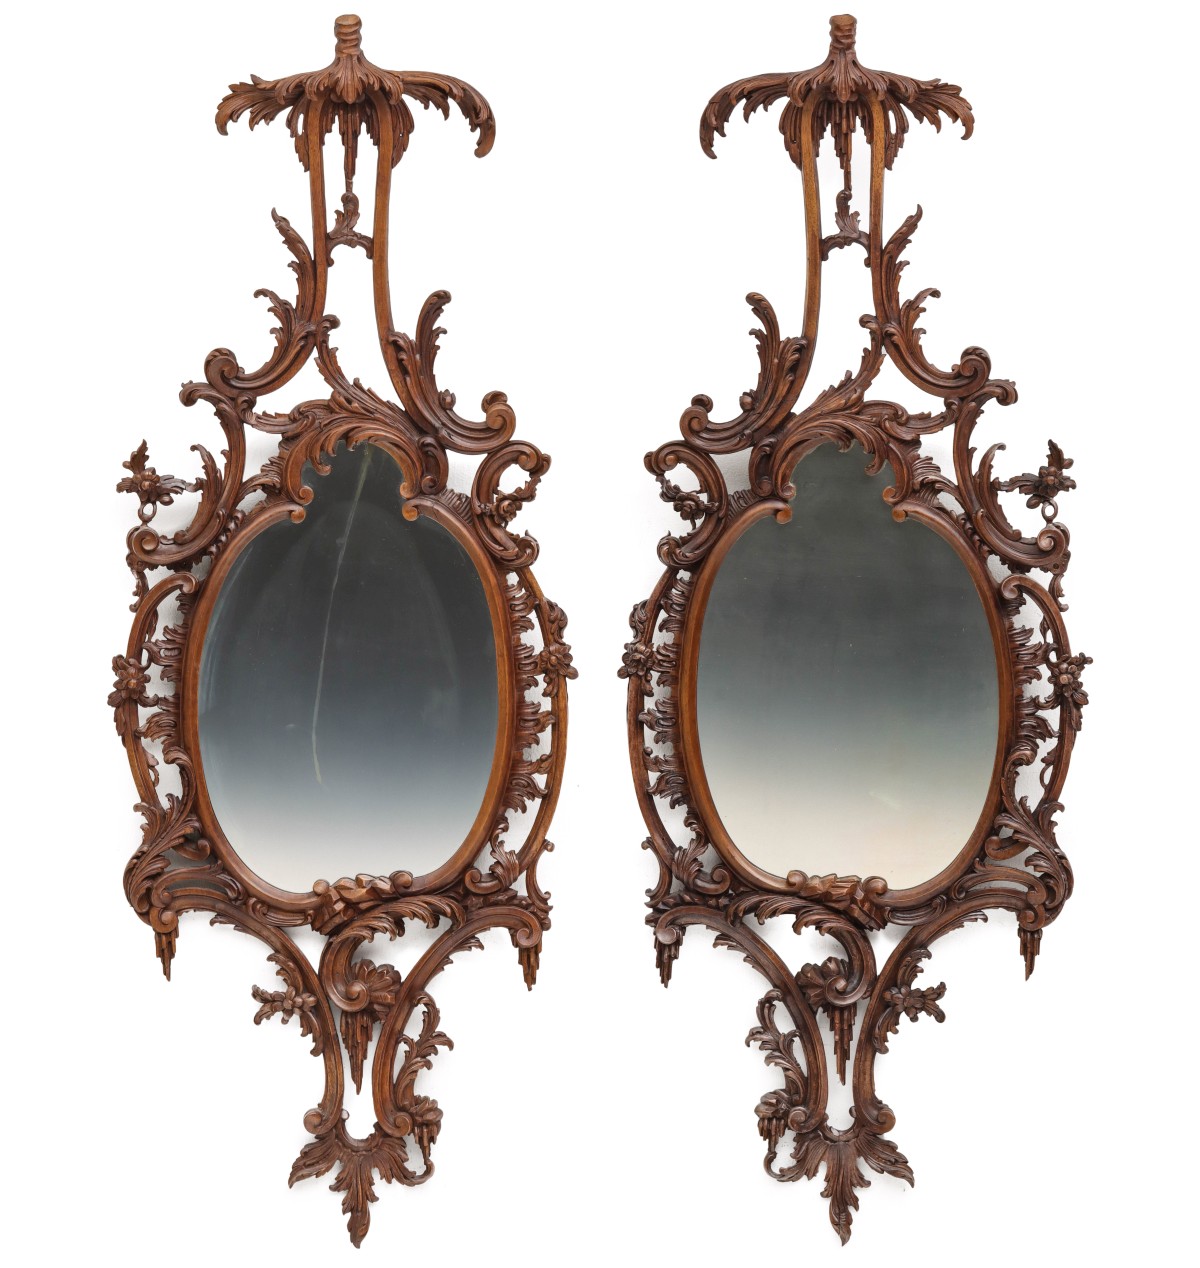 A FINE PAIR 19TH C. FRENCH CARVED WALNUT ROCOCO MIRRORS